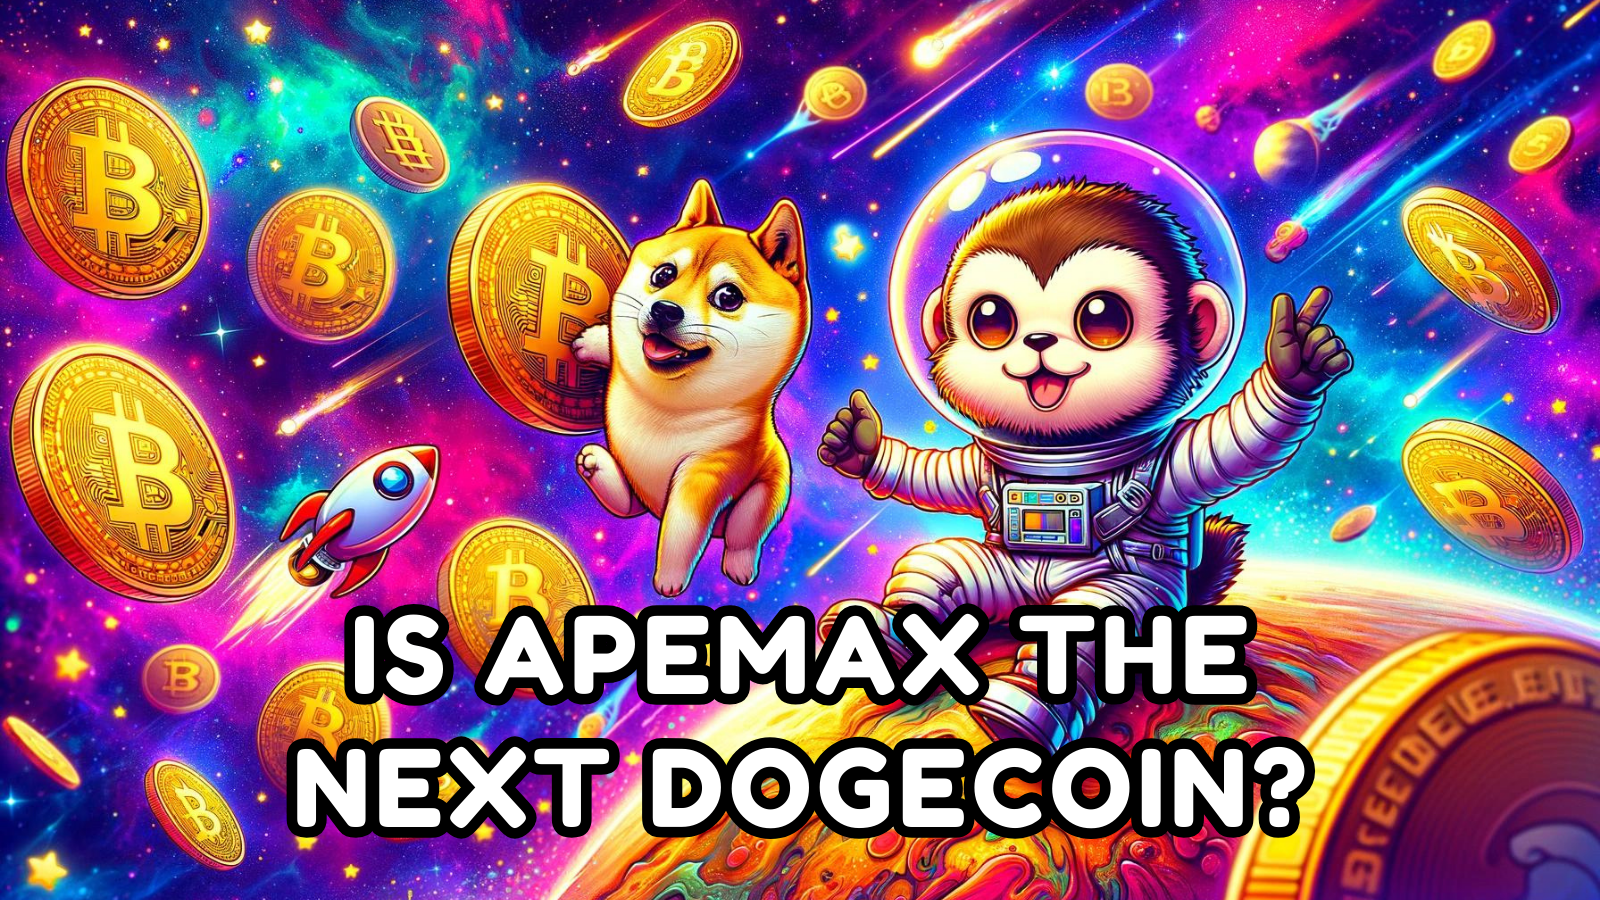 Which of These Will Be the Next Dogecoin? Unveiling the Meme Coins That Could Skyrocket